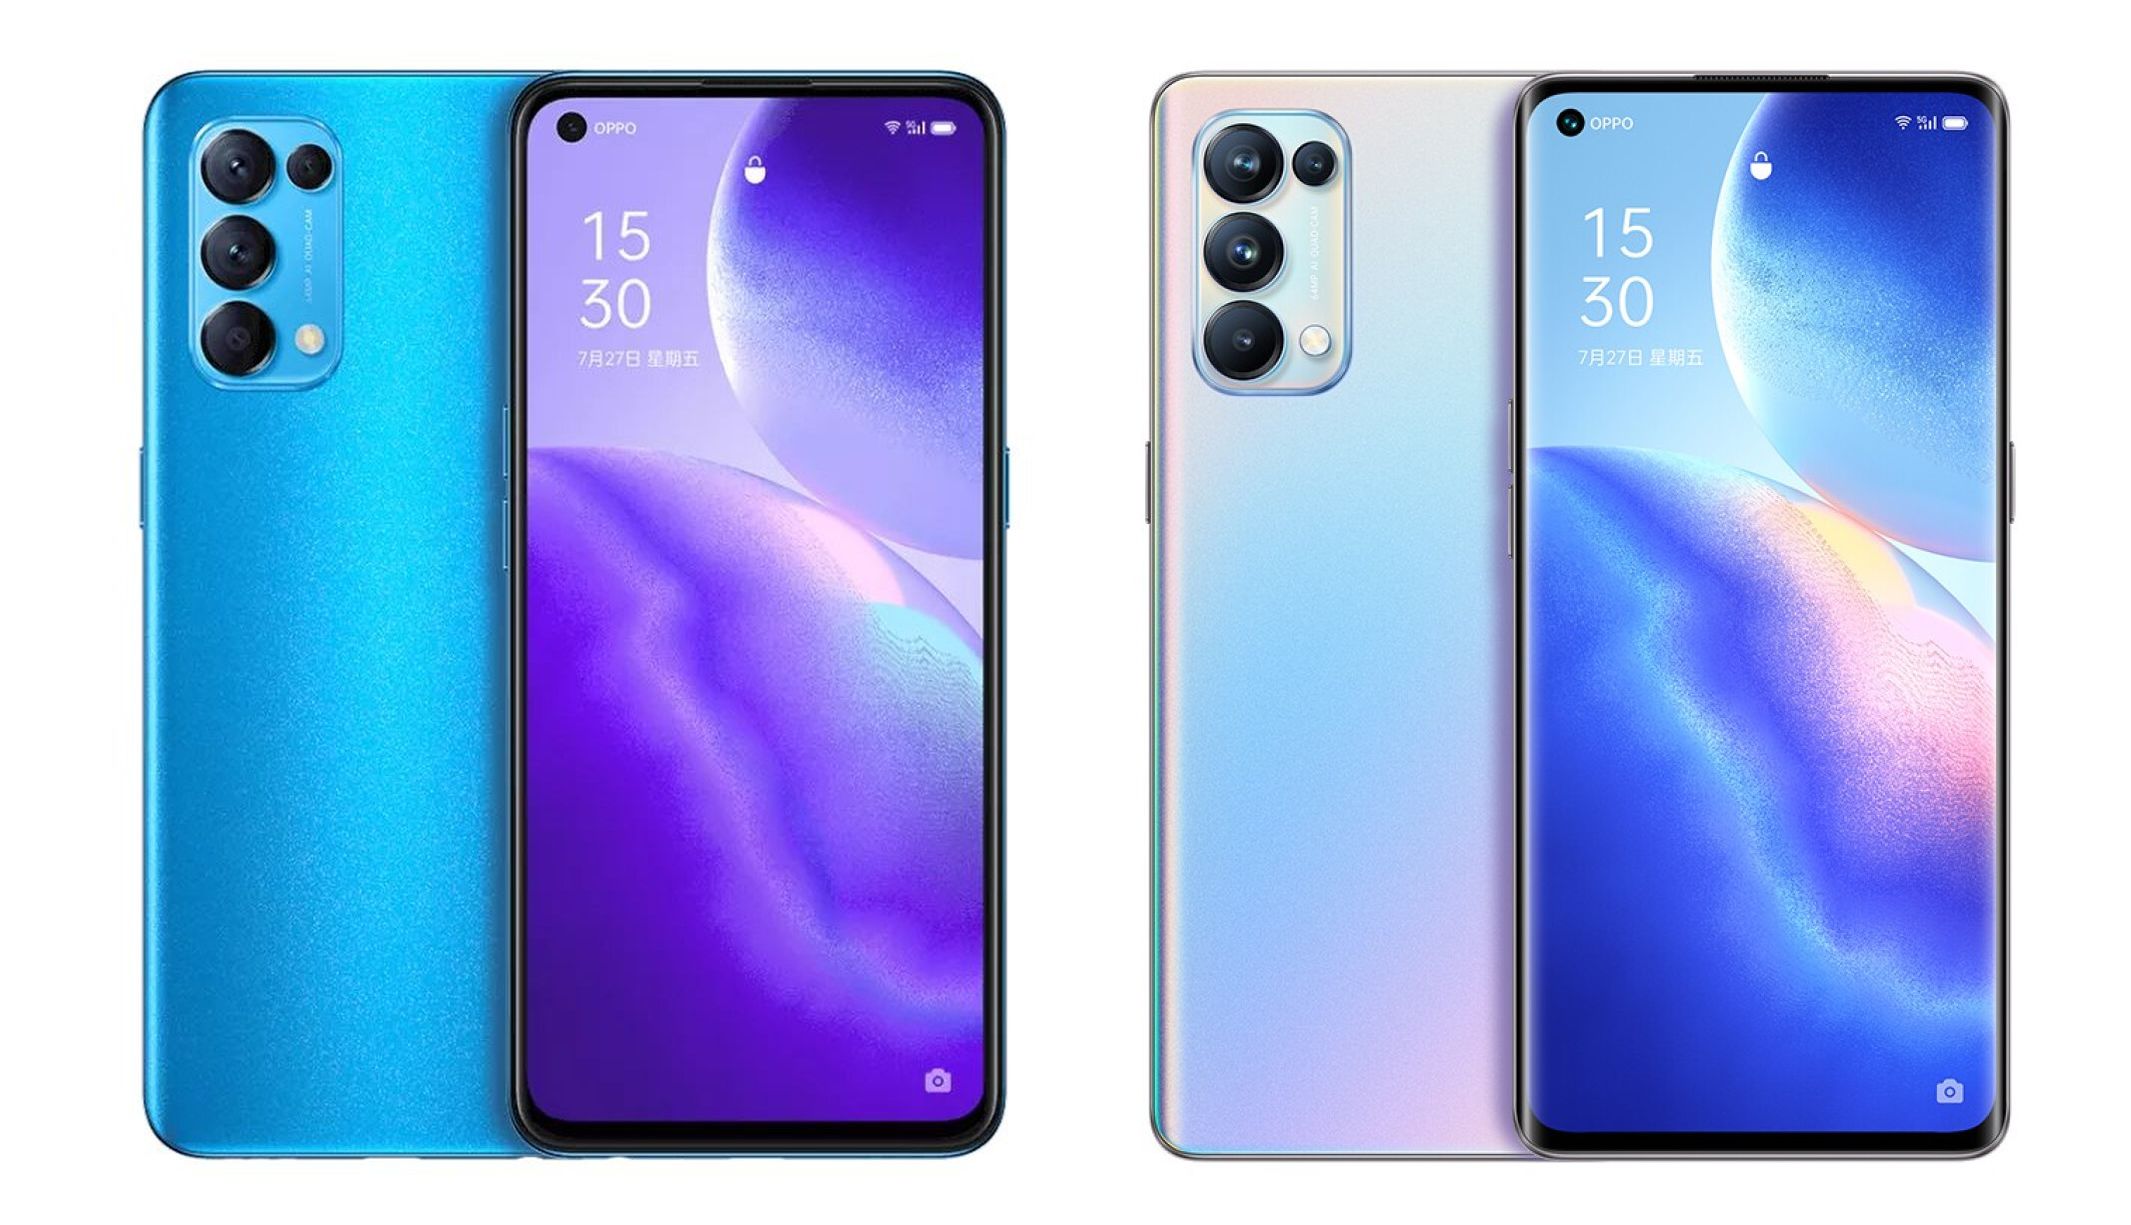 OPPO Launched the Reno5 Pro 5G in India with the Dimensity 1000+ and a Slim Frame